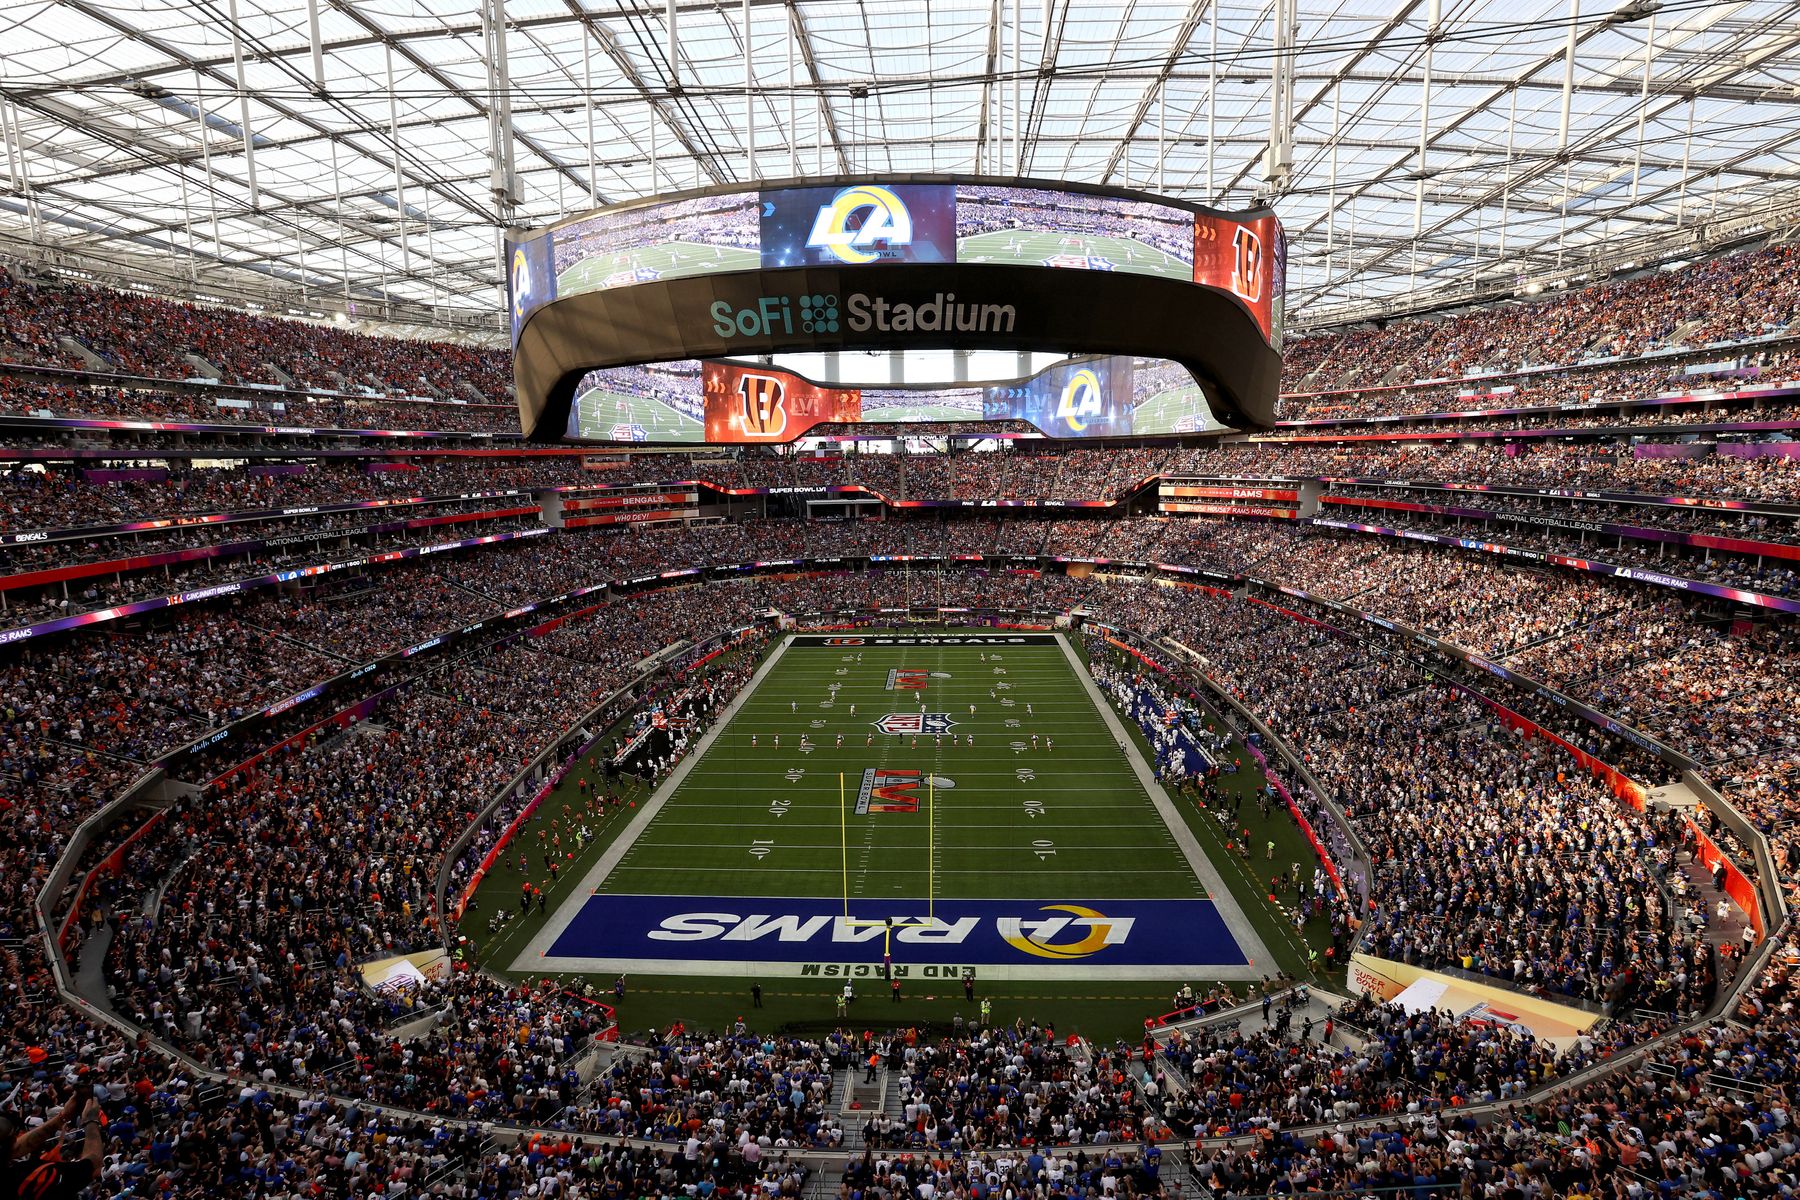 Super Bowl 2022 in L.A. to test whether big spending is back - Los Angeles  Times